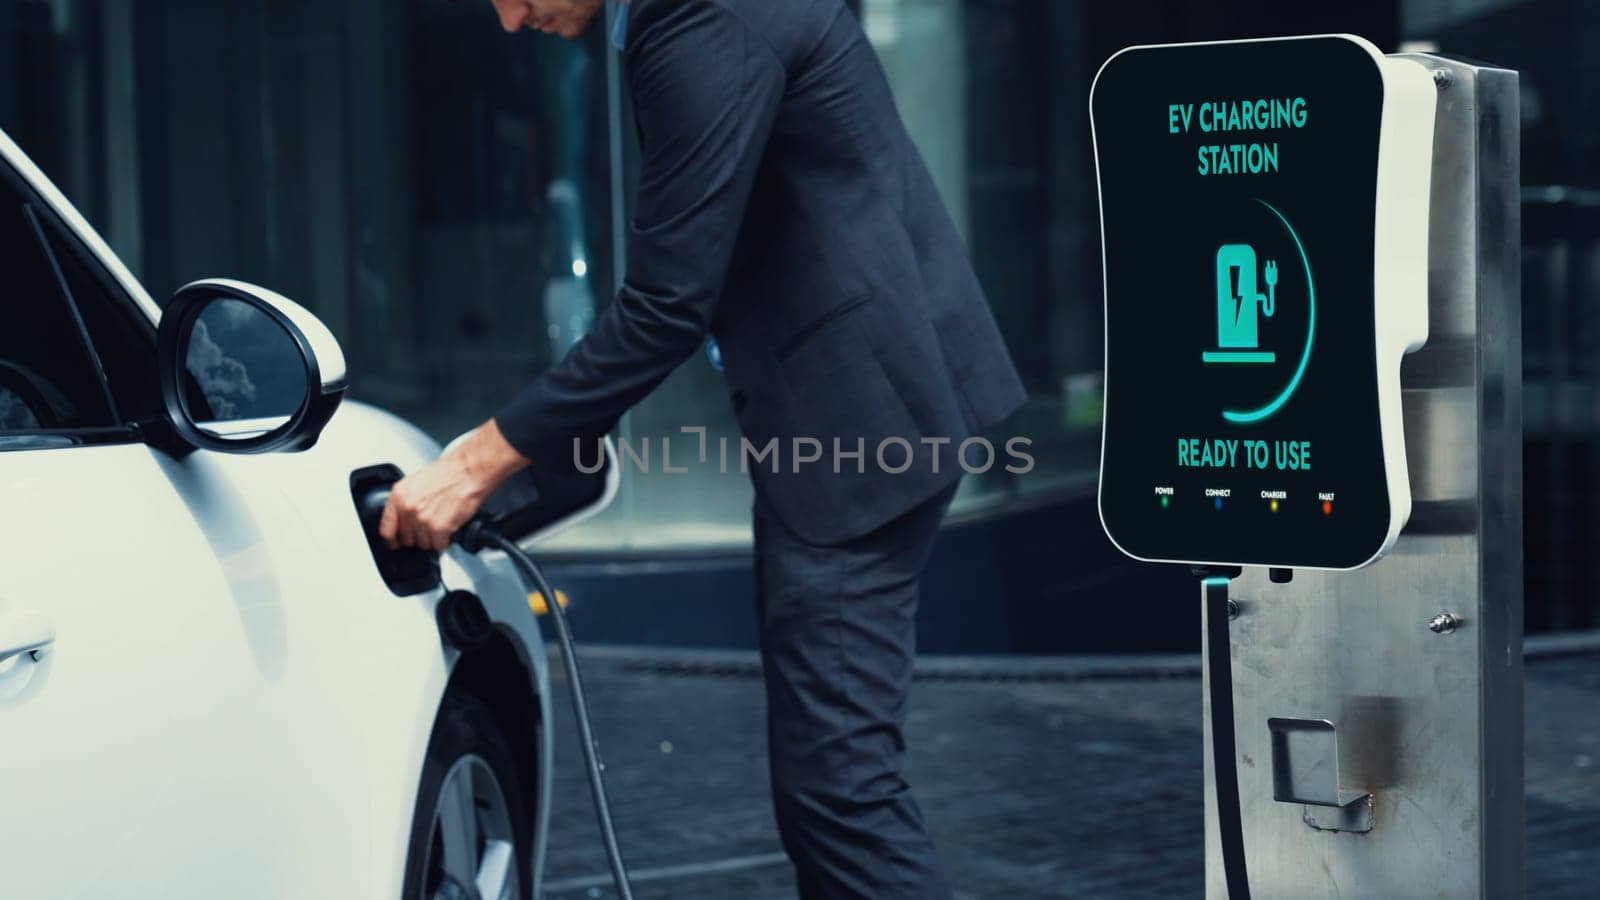 Businessman recharge his electric car from charging station at city center or public car park. Eco friendly rechargeable car using alternative clean energy in urban city lifestyle.Peruse